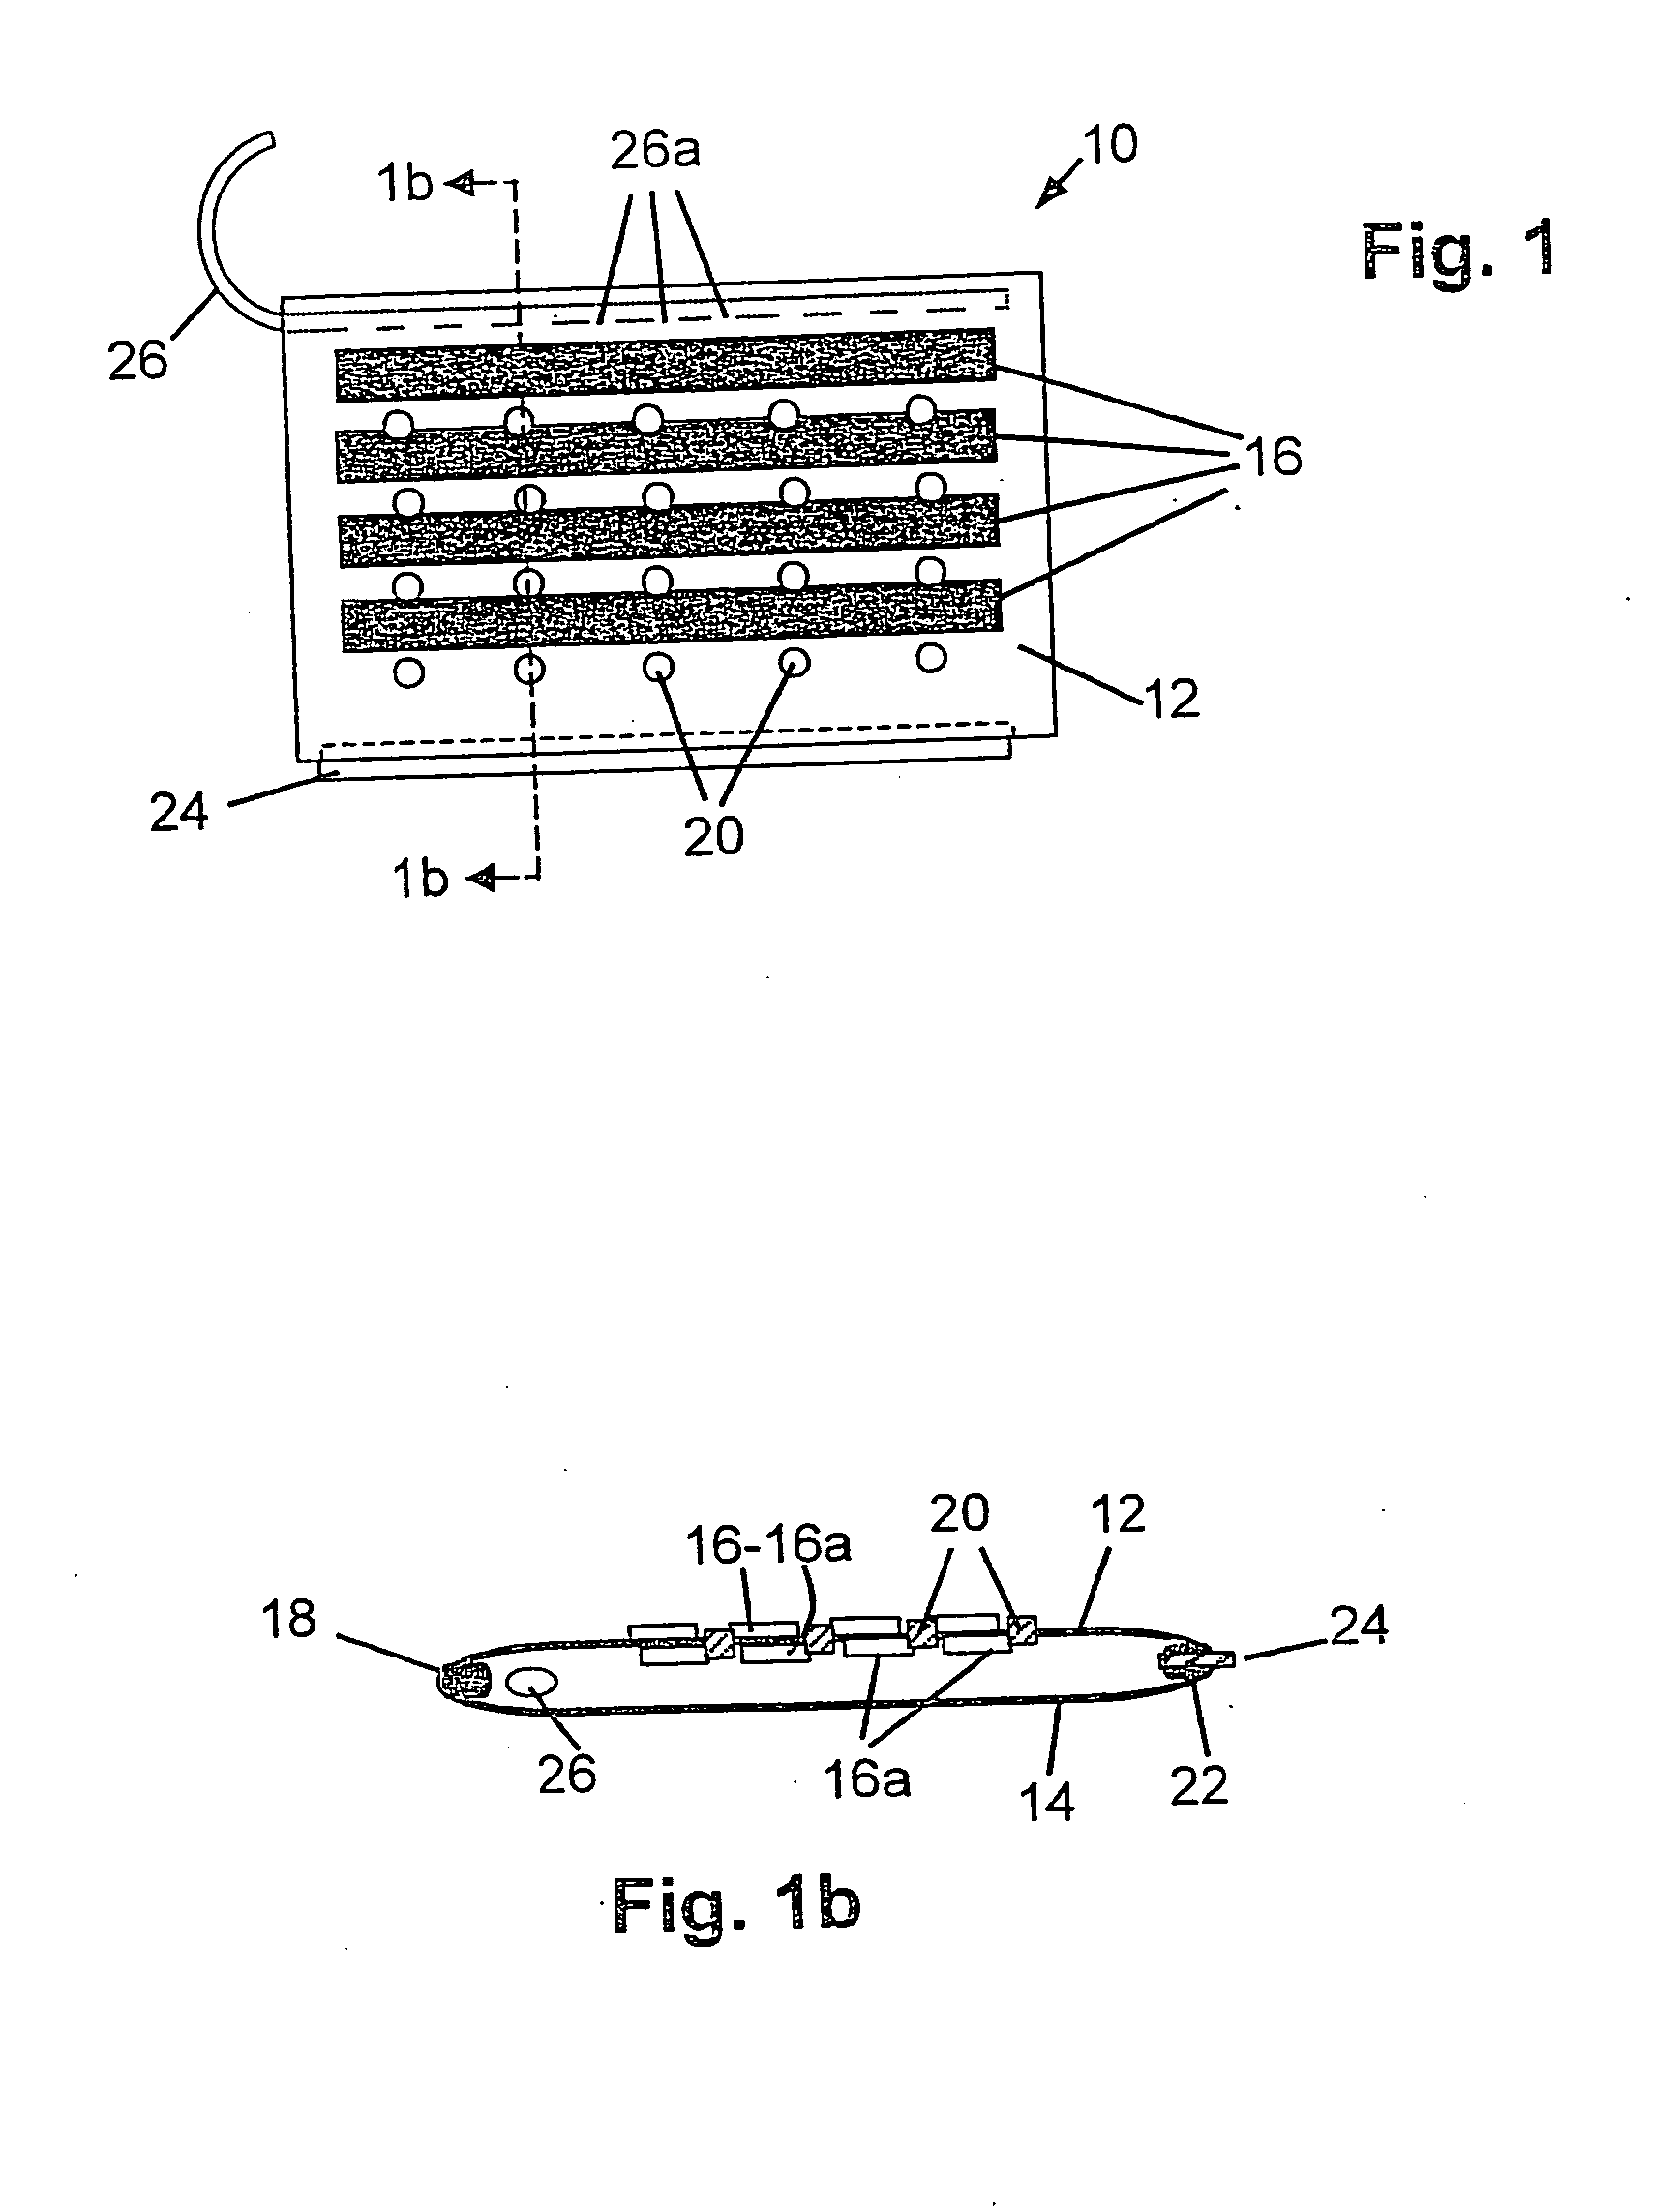 Solid oxide fuel cell assembly with replaceable stack and packet modules